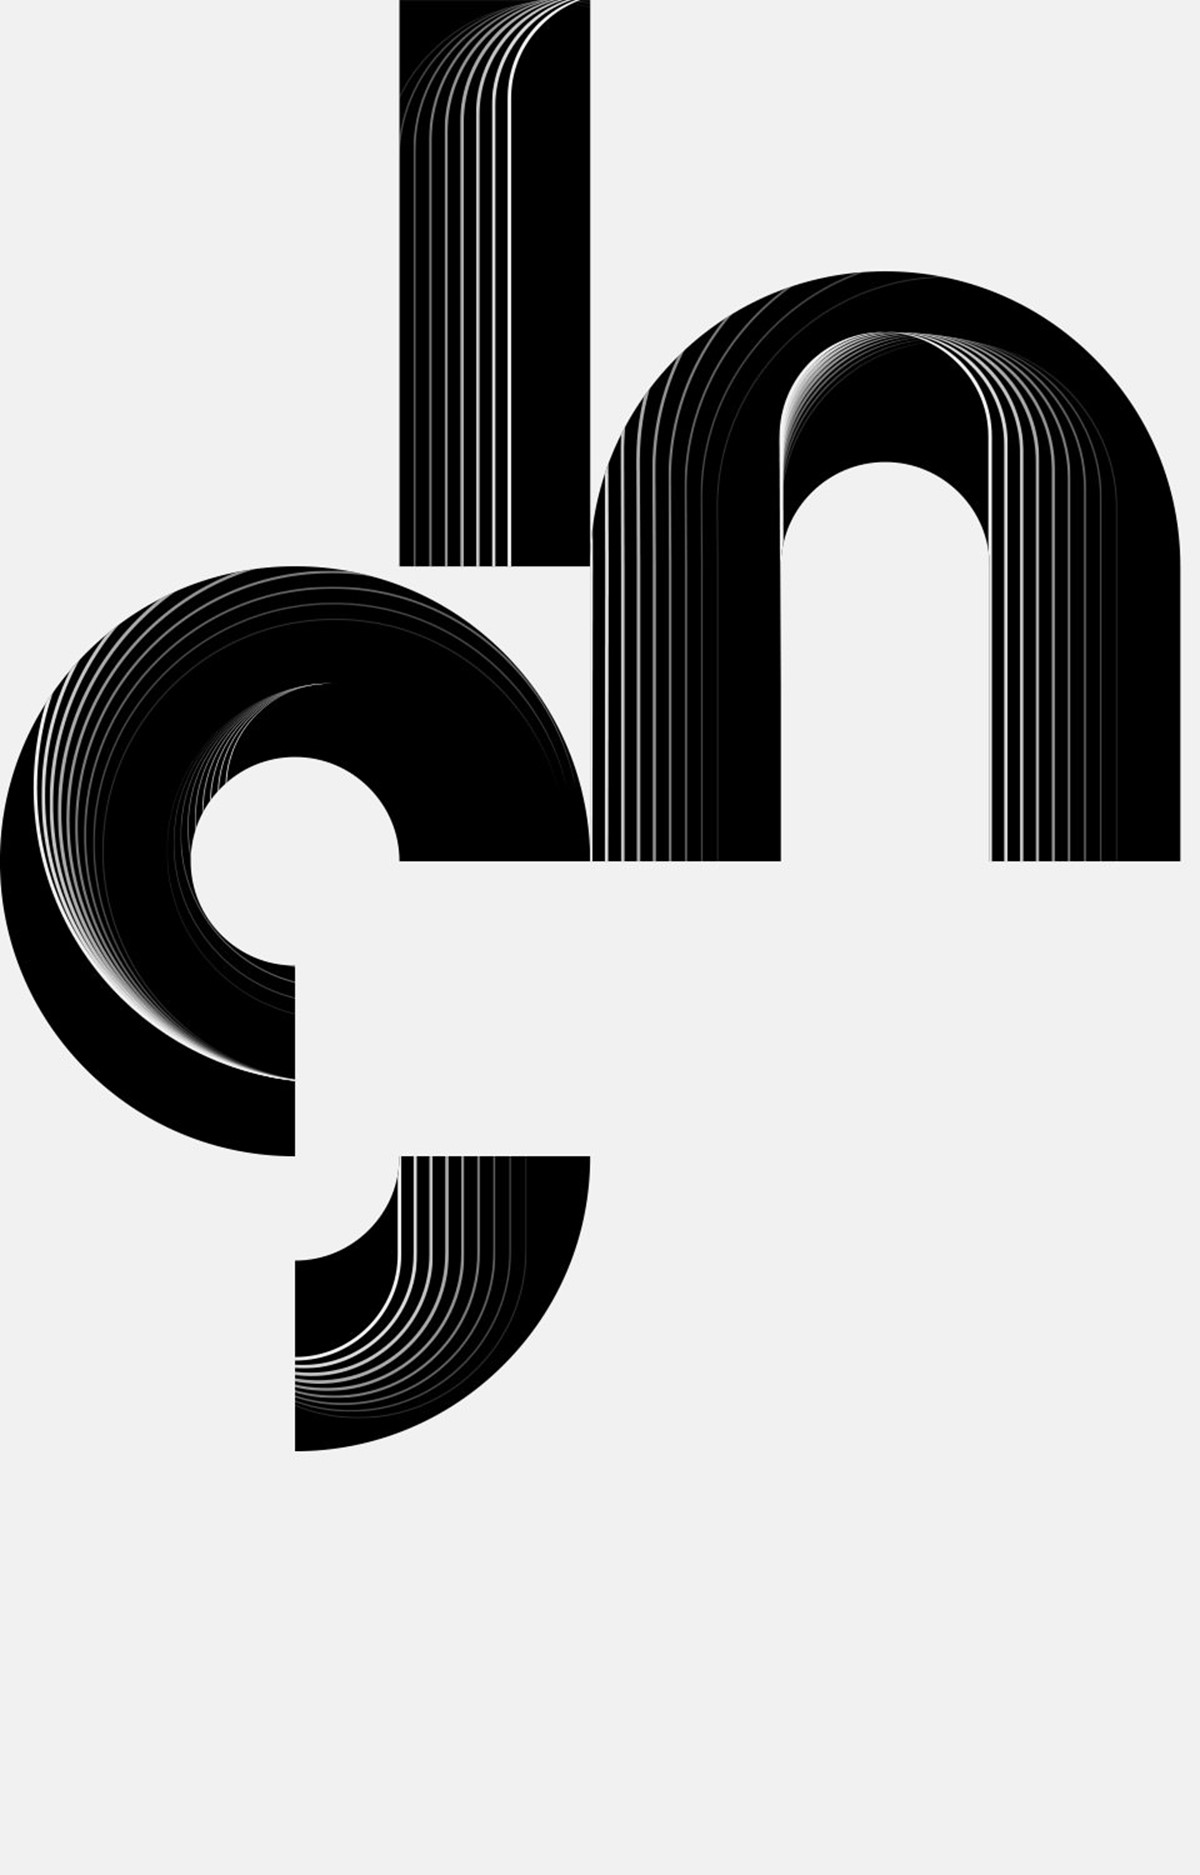 Fast Company Magazine. World Changing Design. Experimental letterforms close up. Design by Superfried.